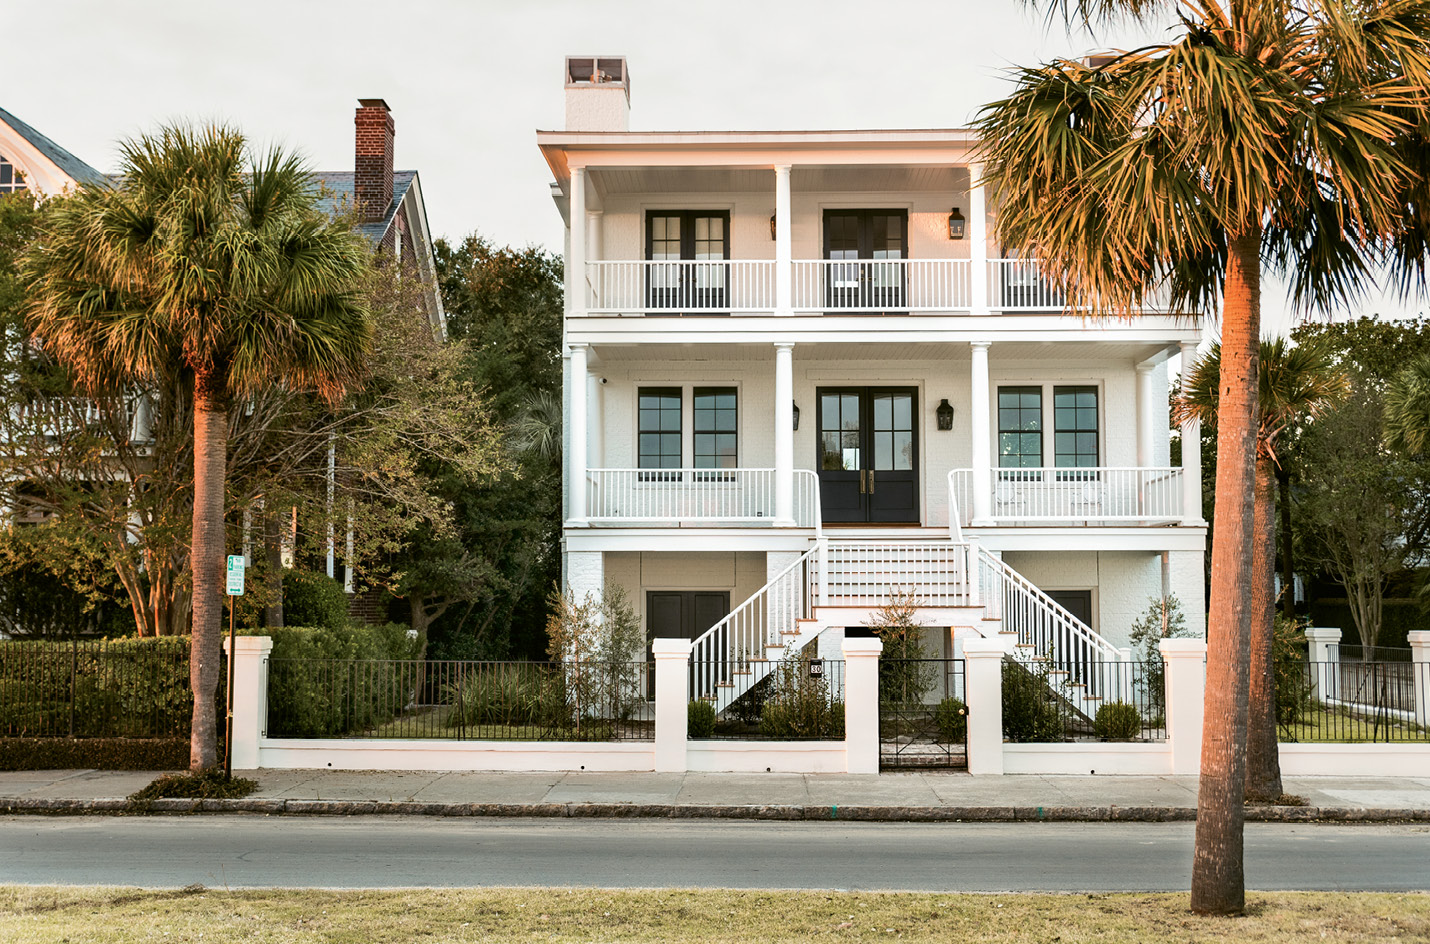 With its double porches, elevated entrance, and graceful symmetry, the home’s façade nods to antebellum architecture, but its clean lines and black window mullions are decidedly modern.